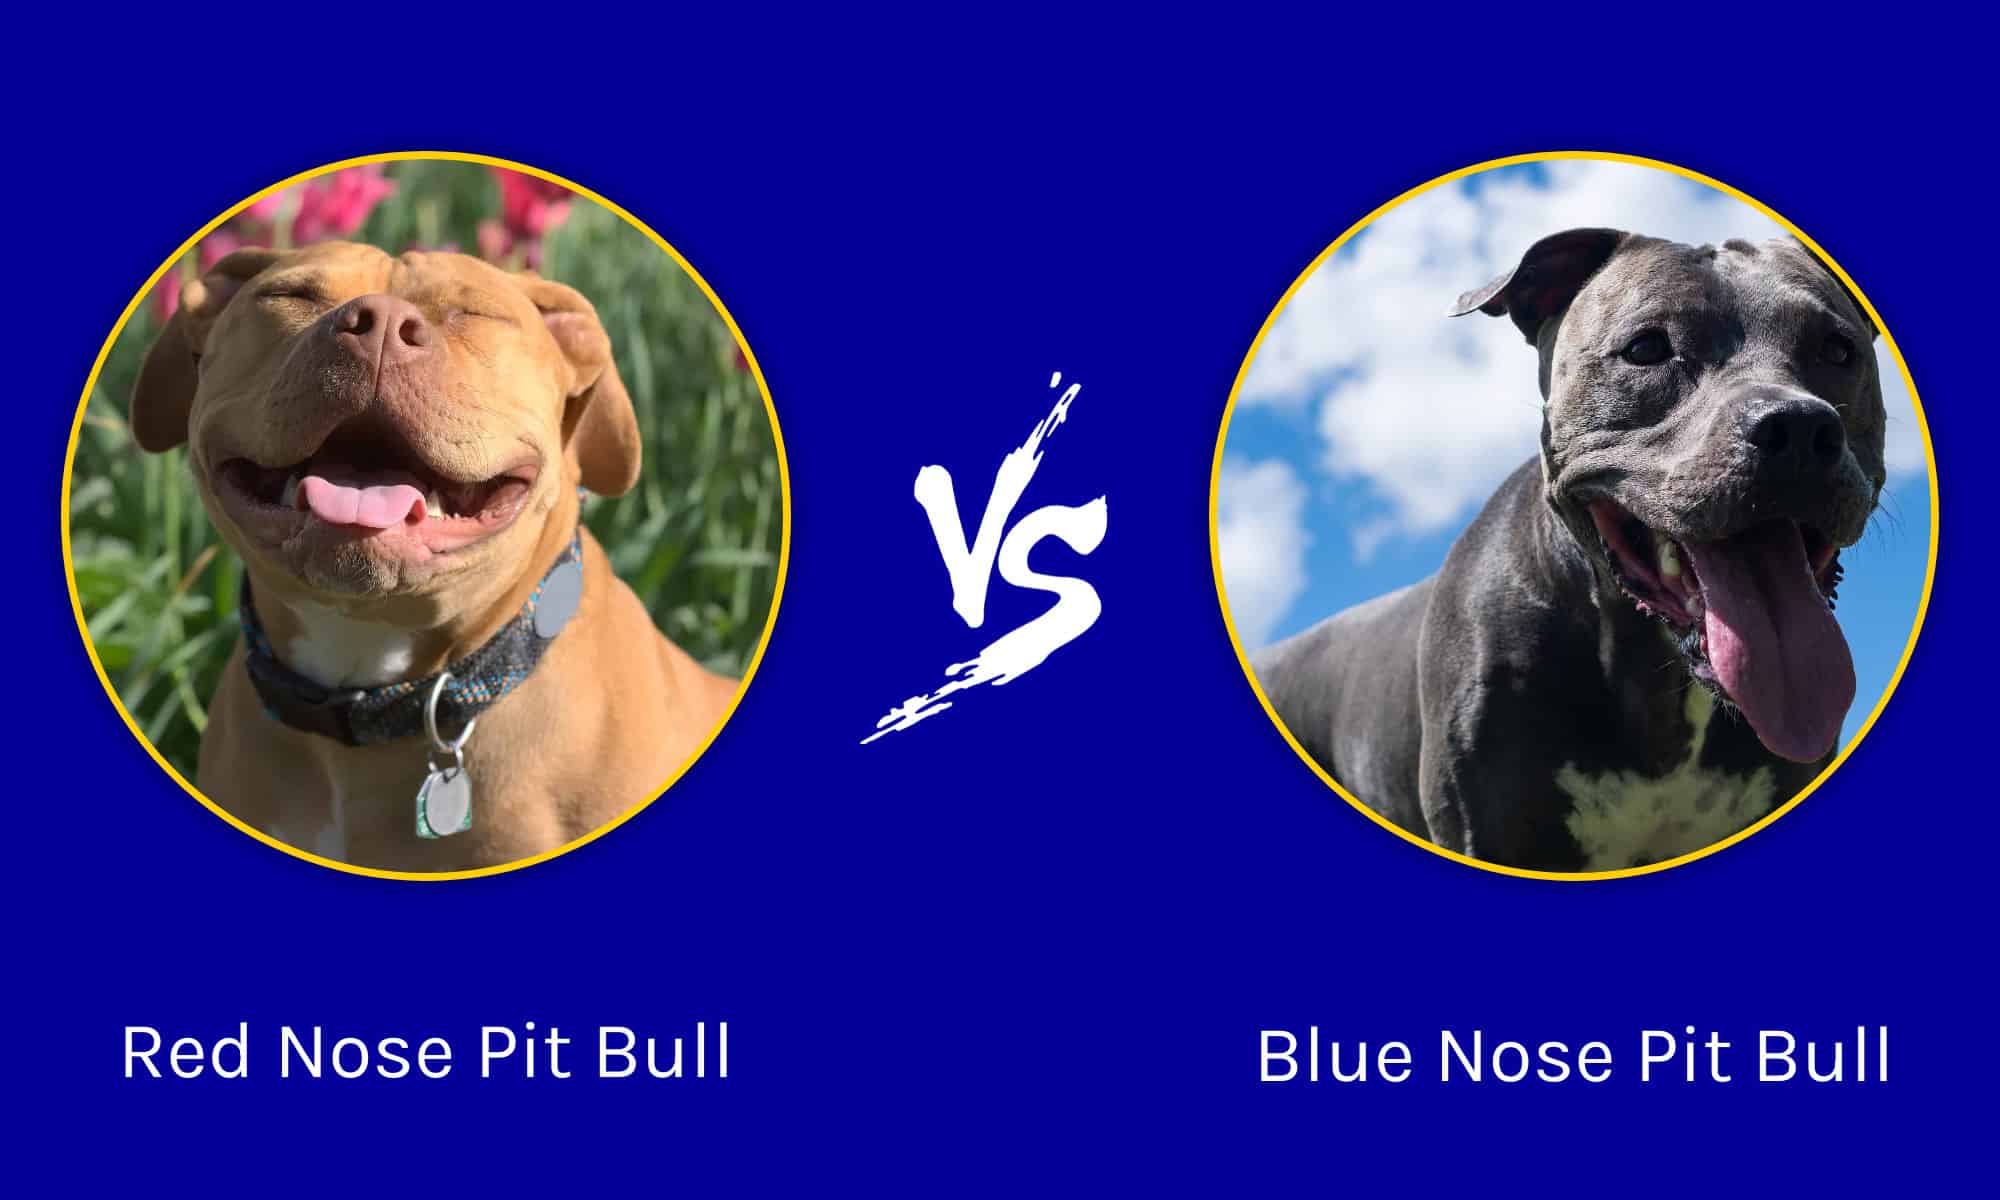 Red Nose Vs. Blue Nose Pit Bull: Pictures And Key Differences - Az Animals